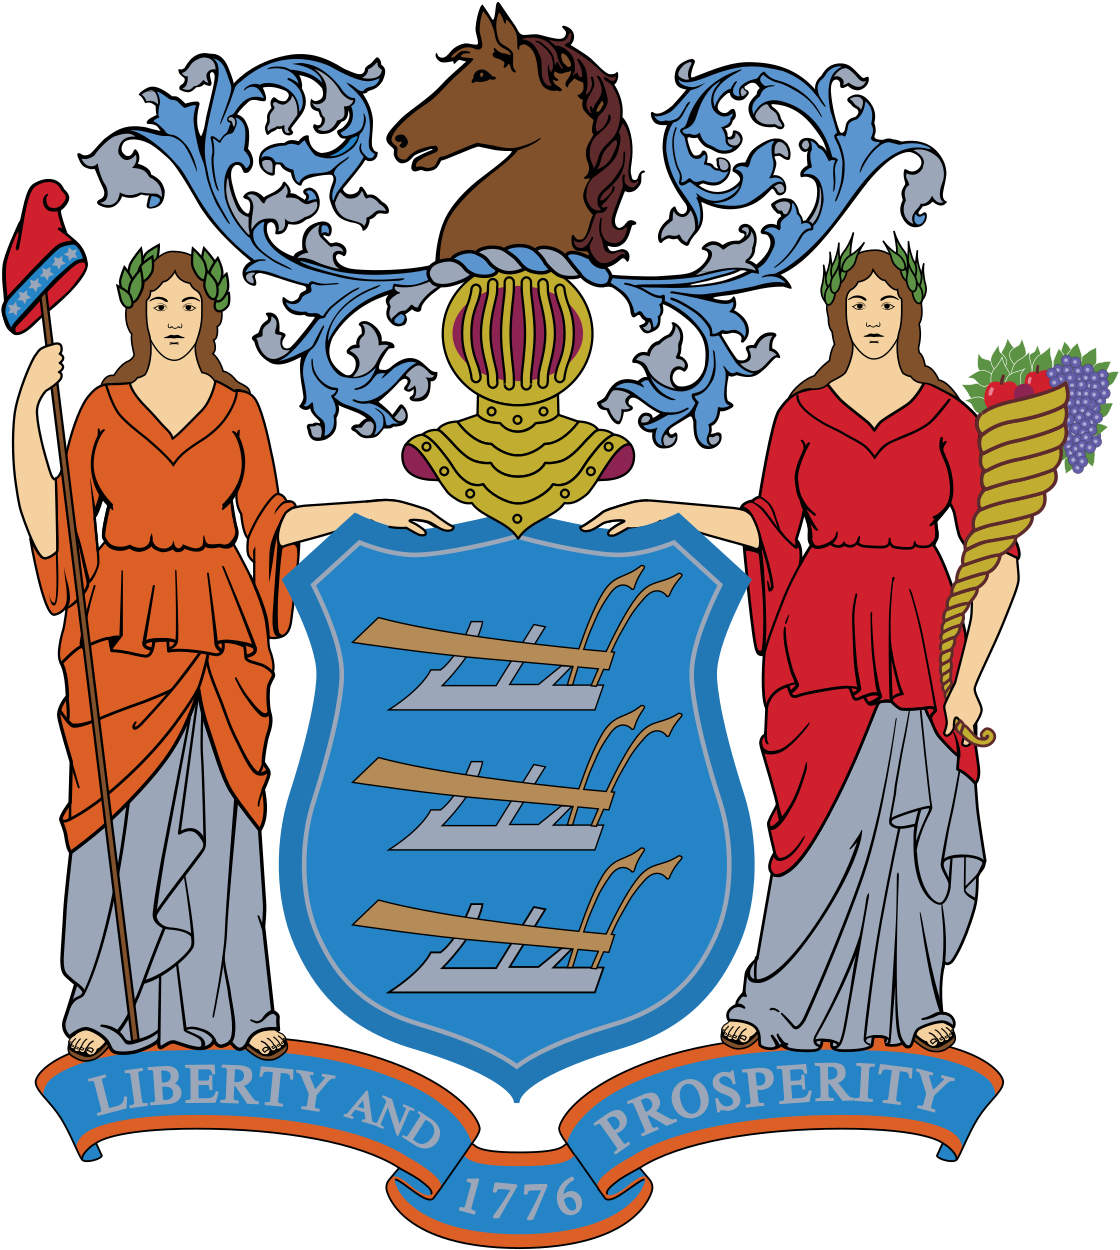 Coat Of Arms Of The State Of New Jersey - New Jersey Department Of Education (1200x1280)